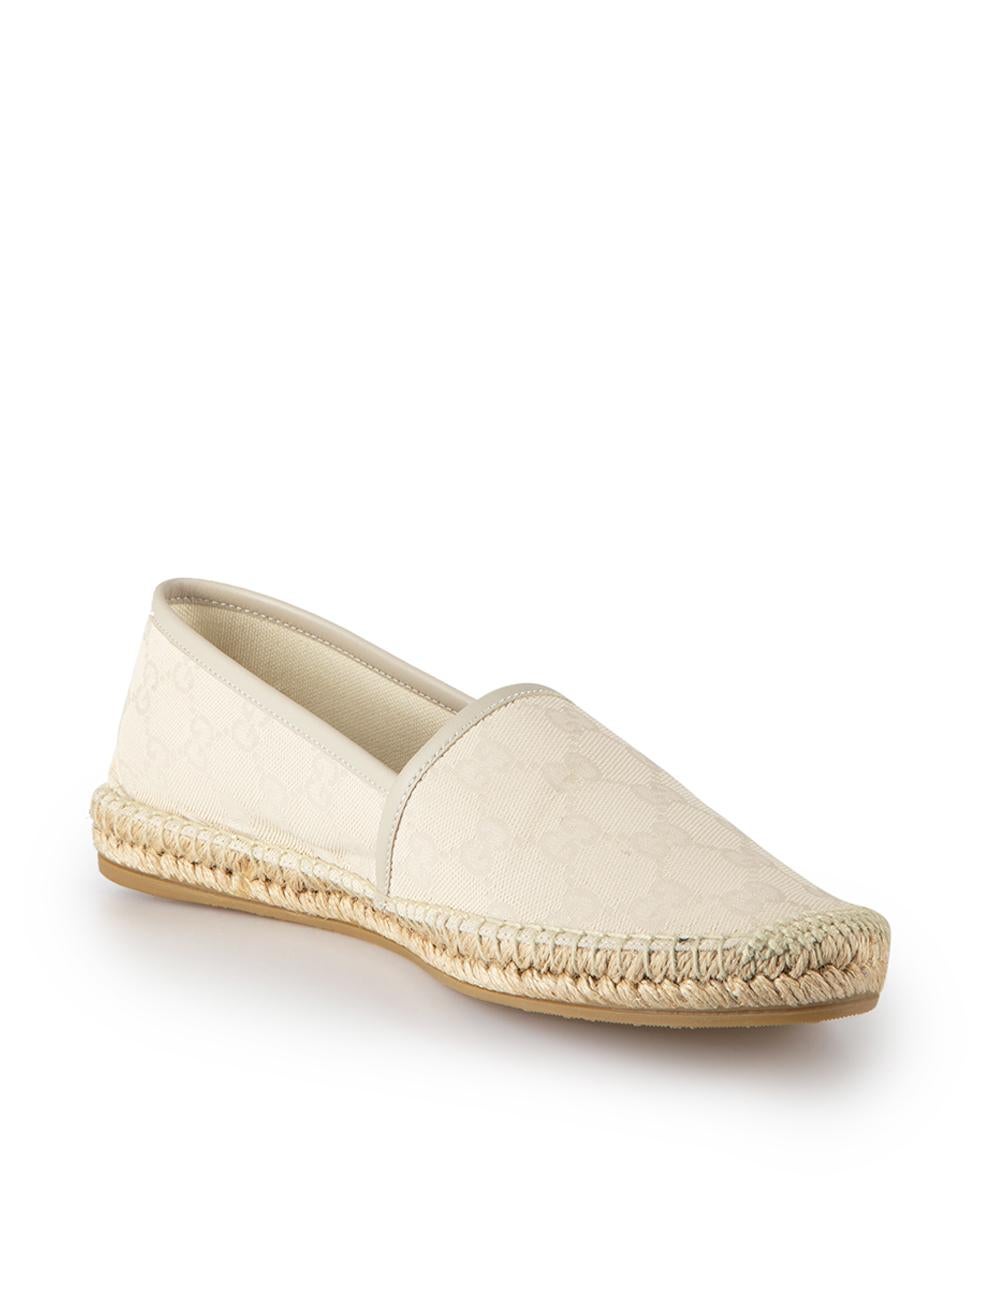 CONDITION is Never Worn. No visible wear to espadrilles is evident on this used Gucci designer resale item. This item comes with original dustbag and shoebox.



Details


Cream

Canvas

Espadrilles

GG monogram pattern

Round toe

Flat